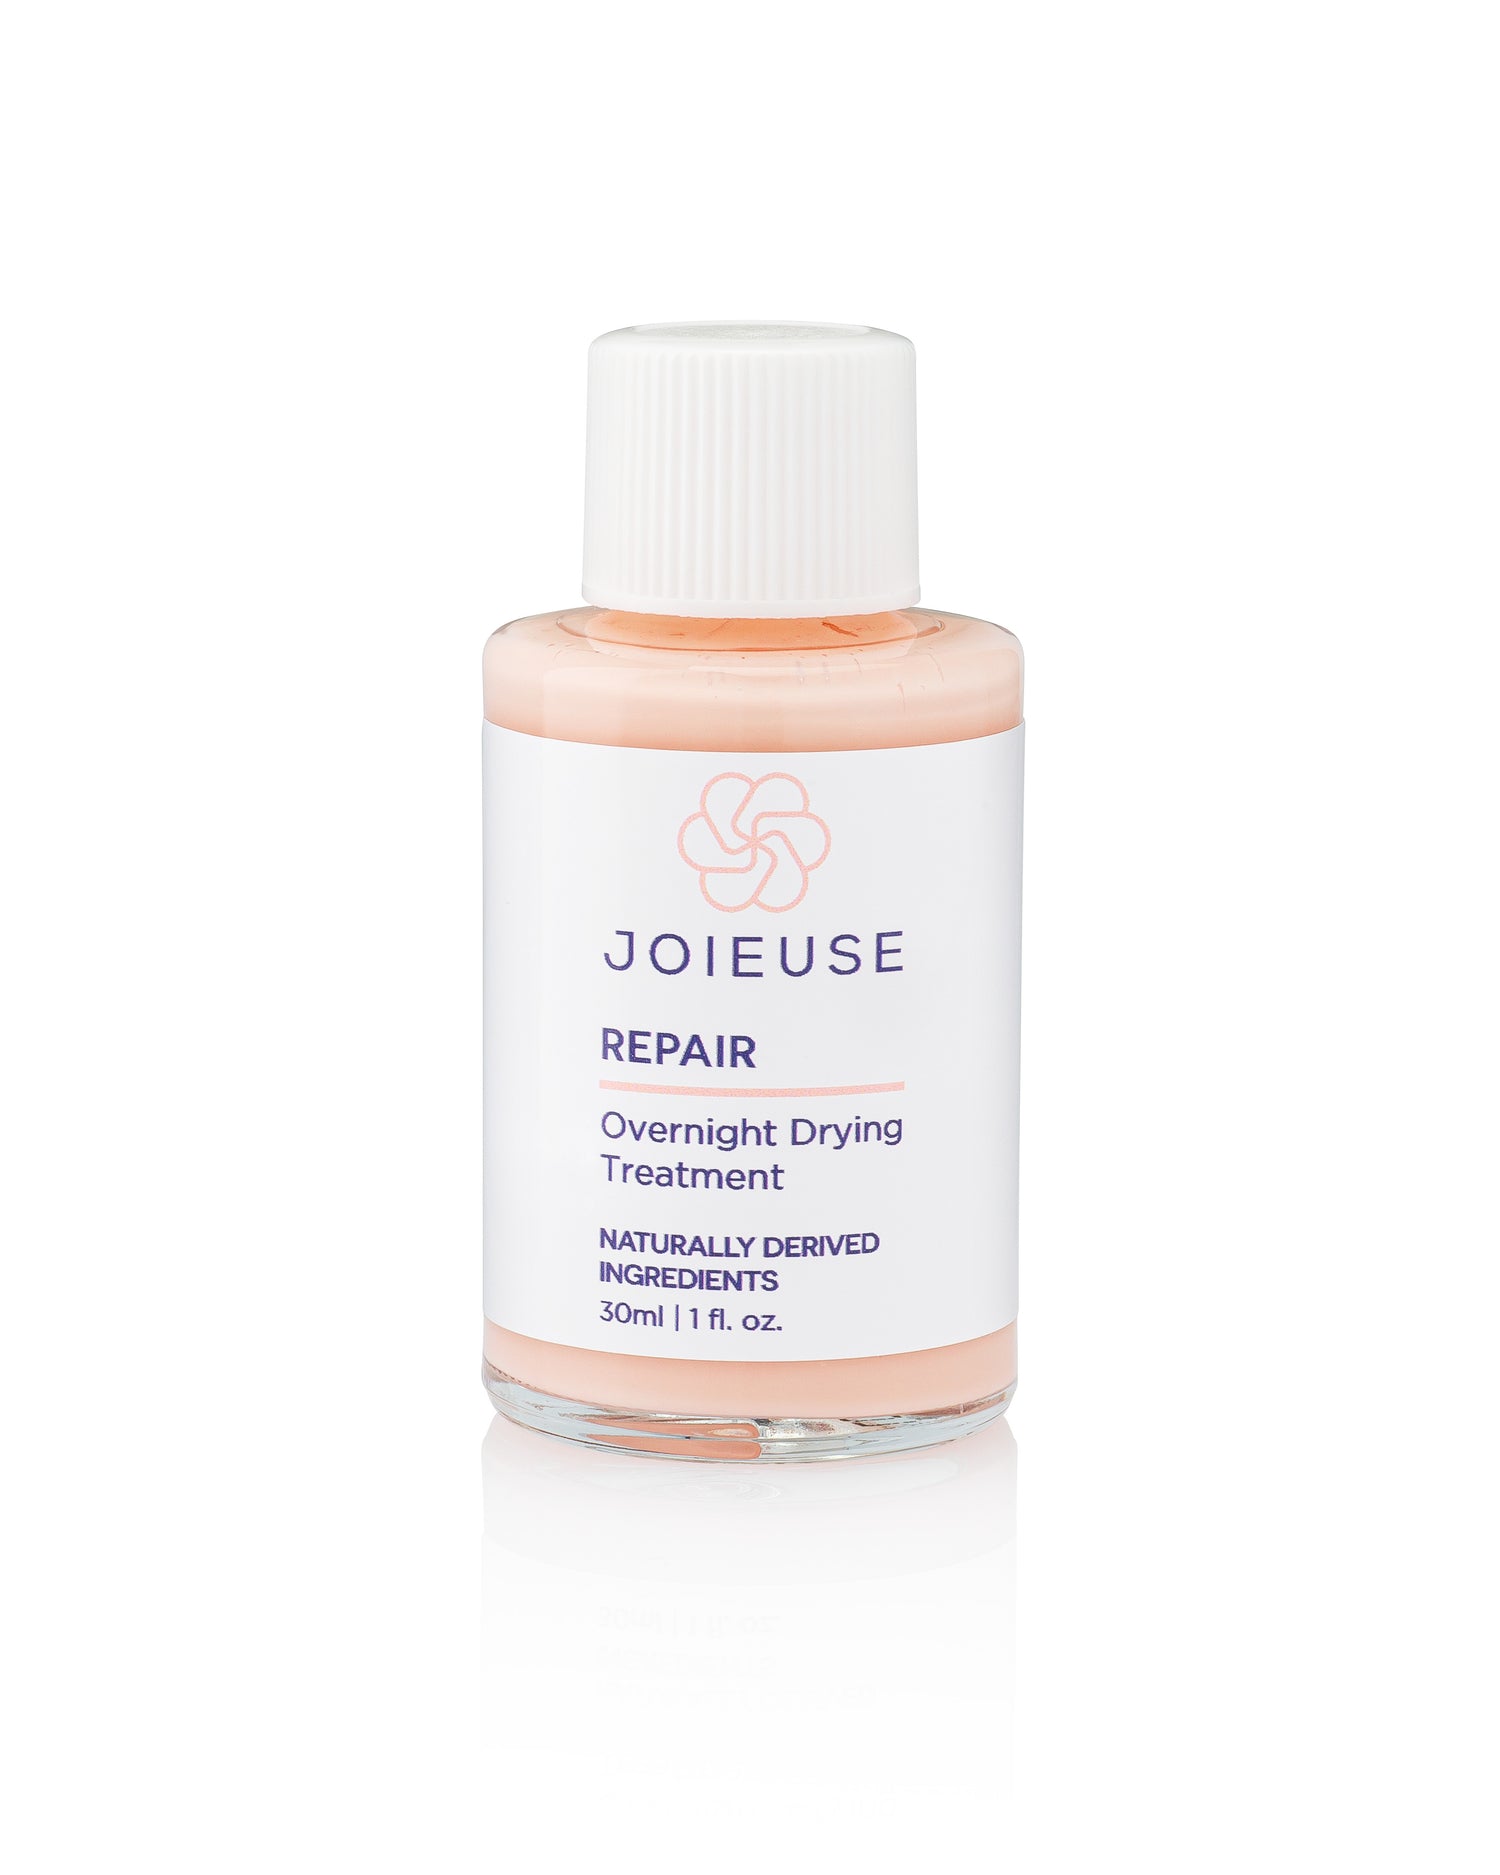 Joieuse Overnight Drying Repair Treatment